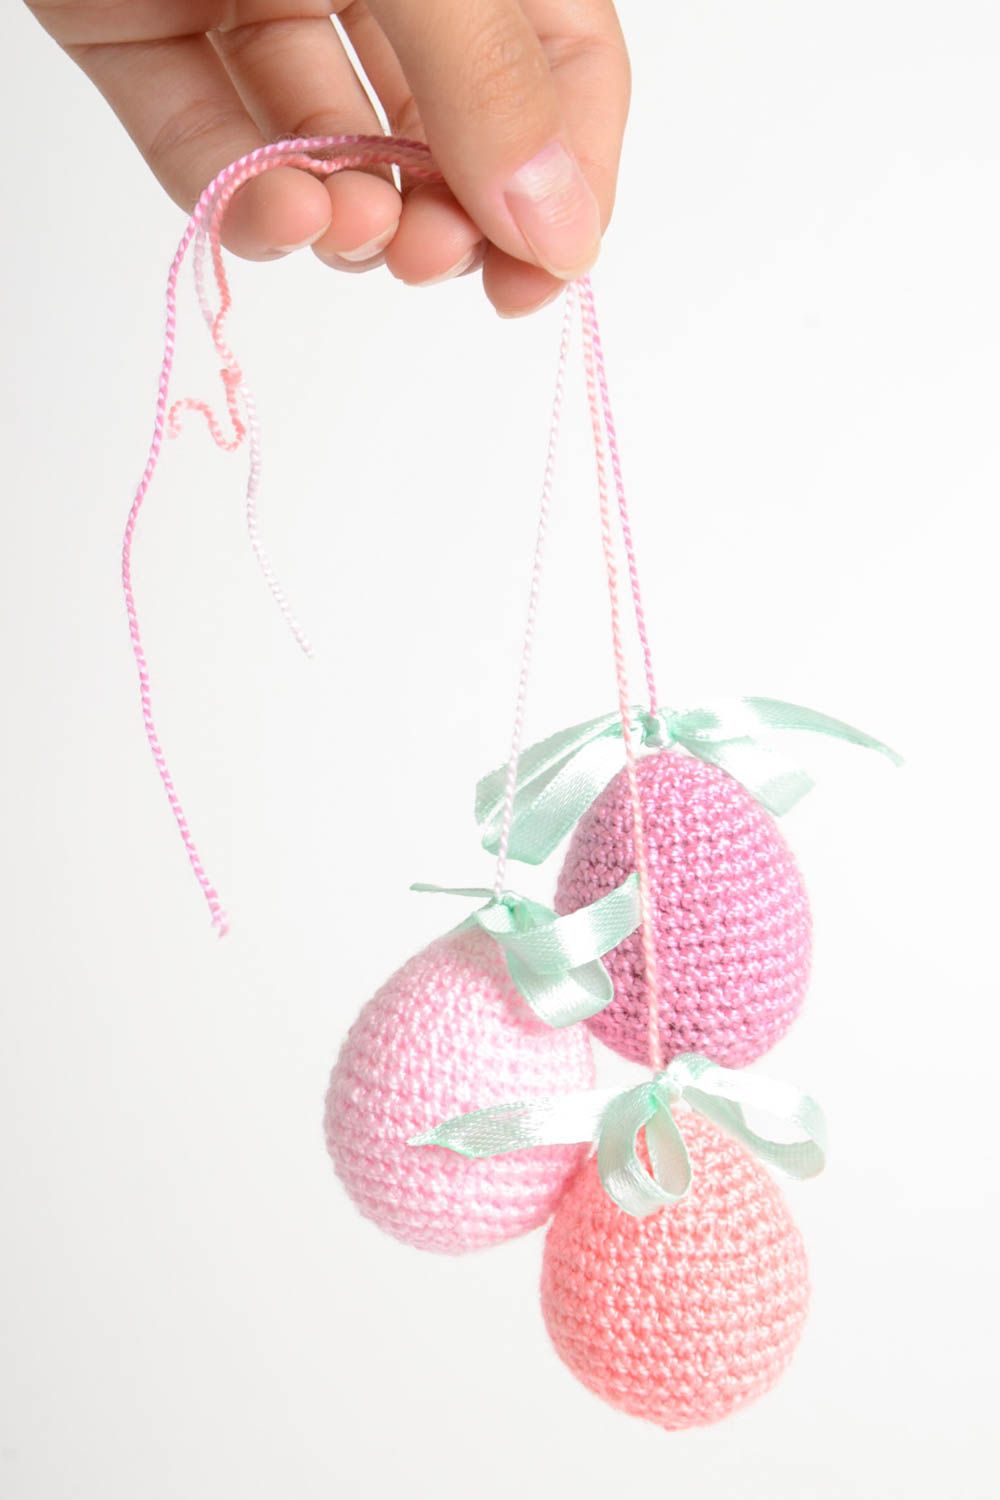 Beautiful handmade crochet Easter egg Easter decoration 3 pieces gift ideas photo 2